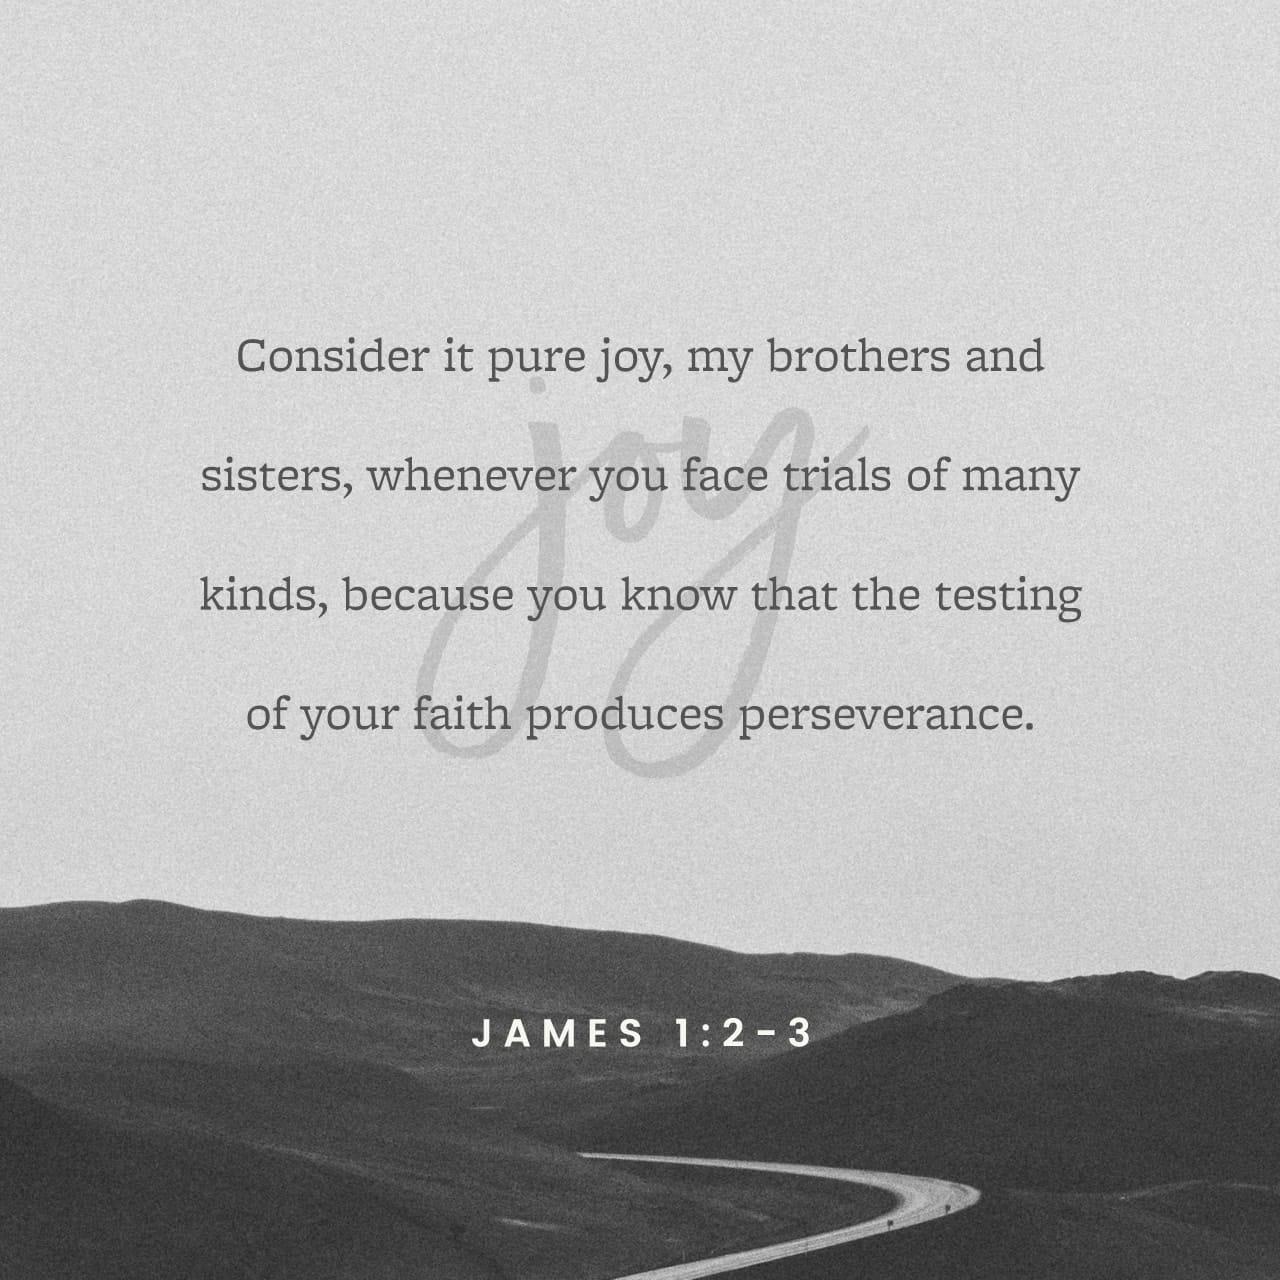 Bible Verse of the Day - day 90 - image 2185 (James 1:2)